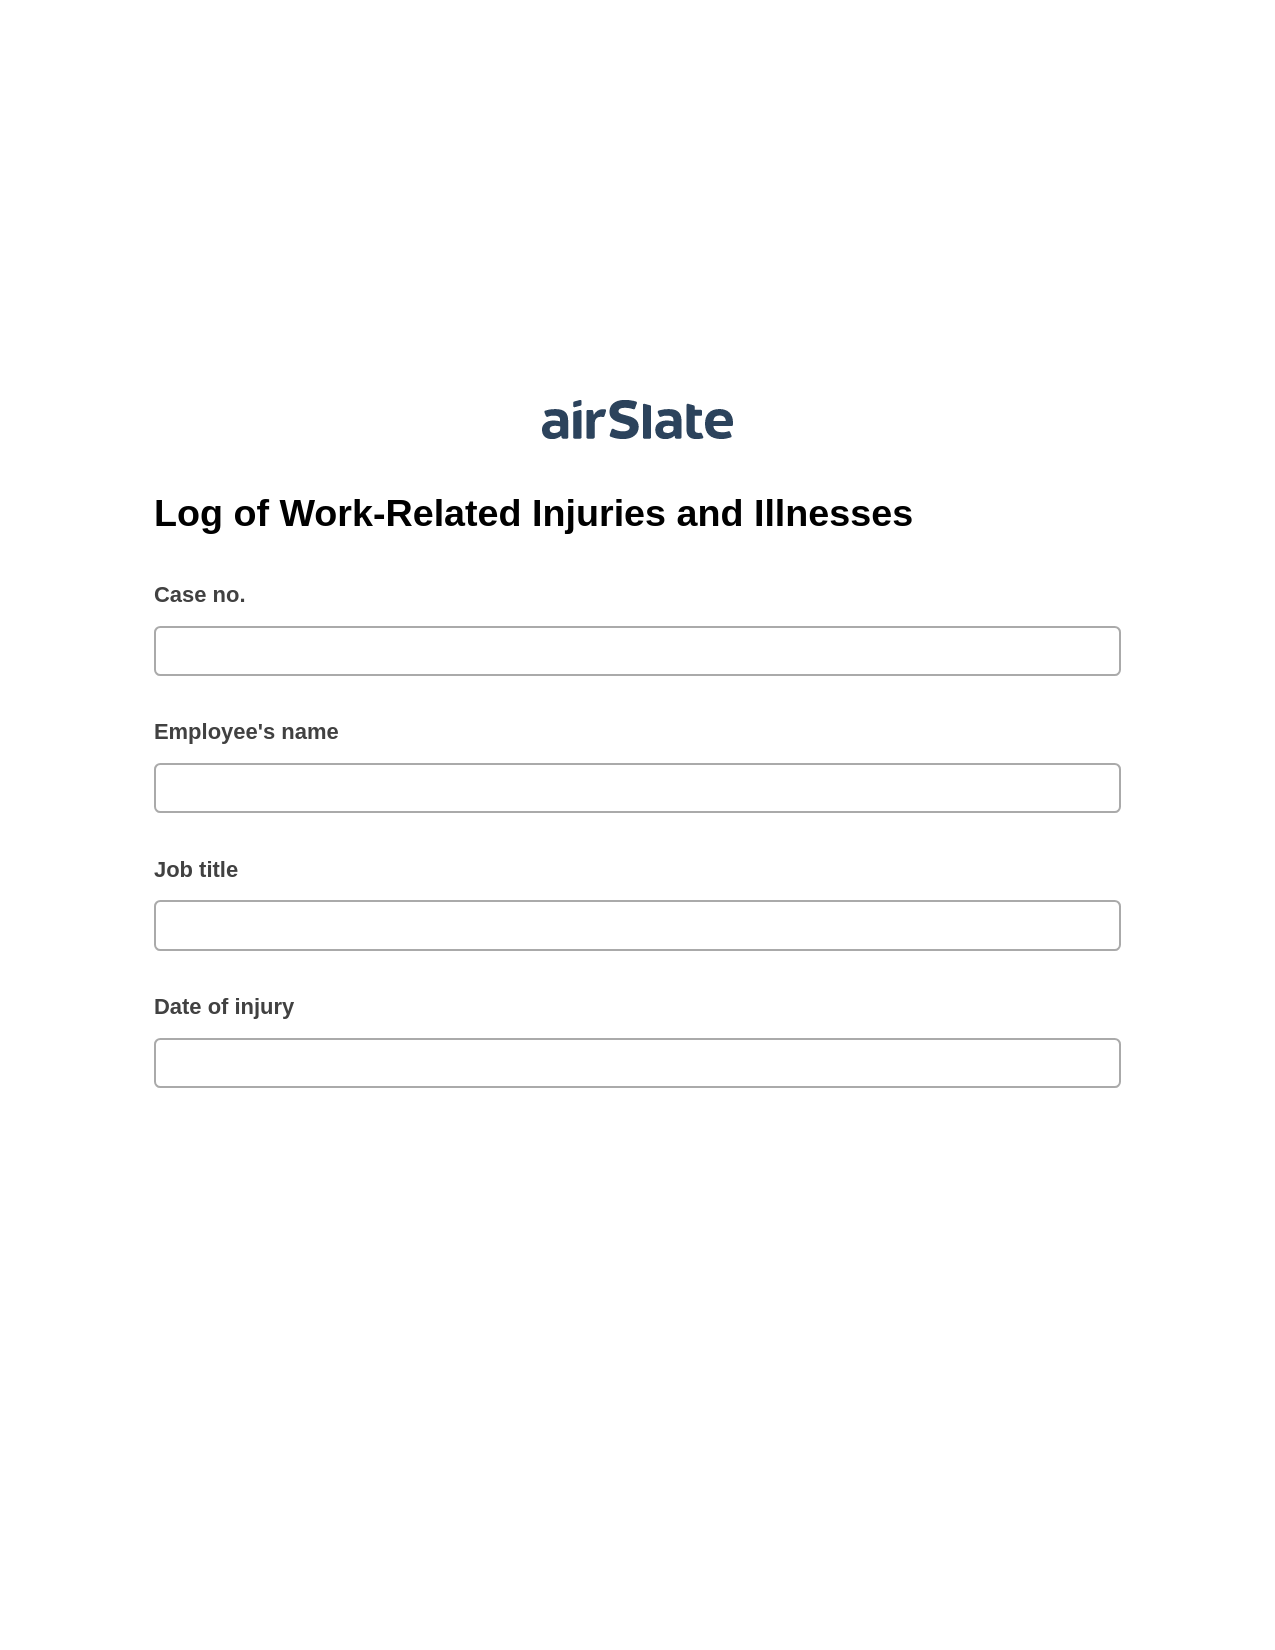 Log of Work-Related Injuries and Illnesses Pre-fill from Salesforce Record Bot, Unassign Role Bot, Google Drive Bot